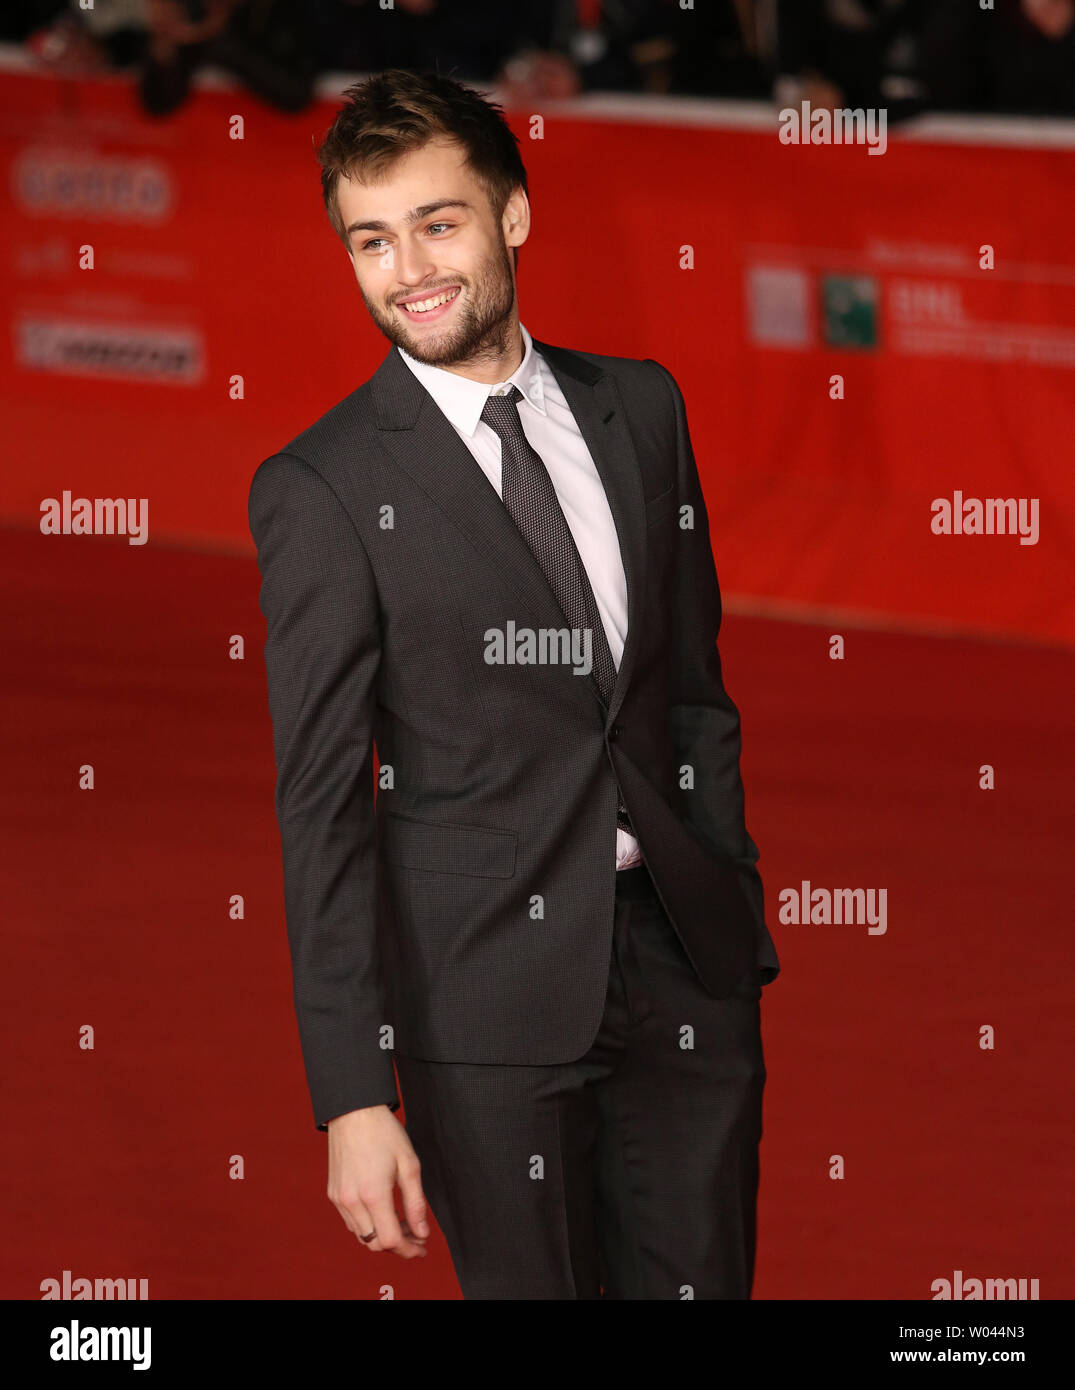 Douglas Booth arrives on the red carpet before the screening of the film 'Romeo and Juliet' during the 8th annual Rome International Film Festival in Rome on November 11, 2013.   UPI/David Silpa Stock Photo